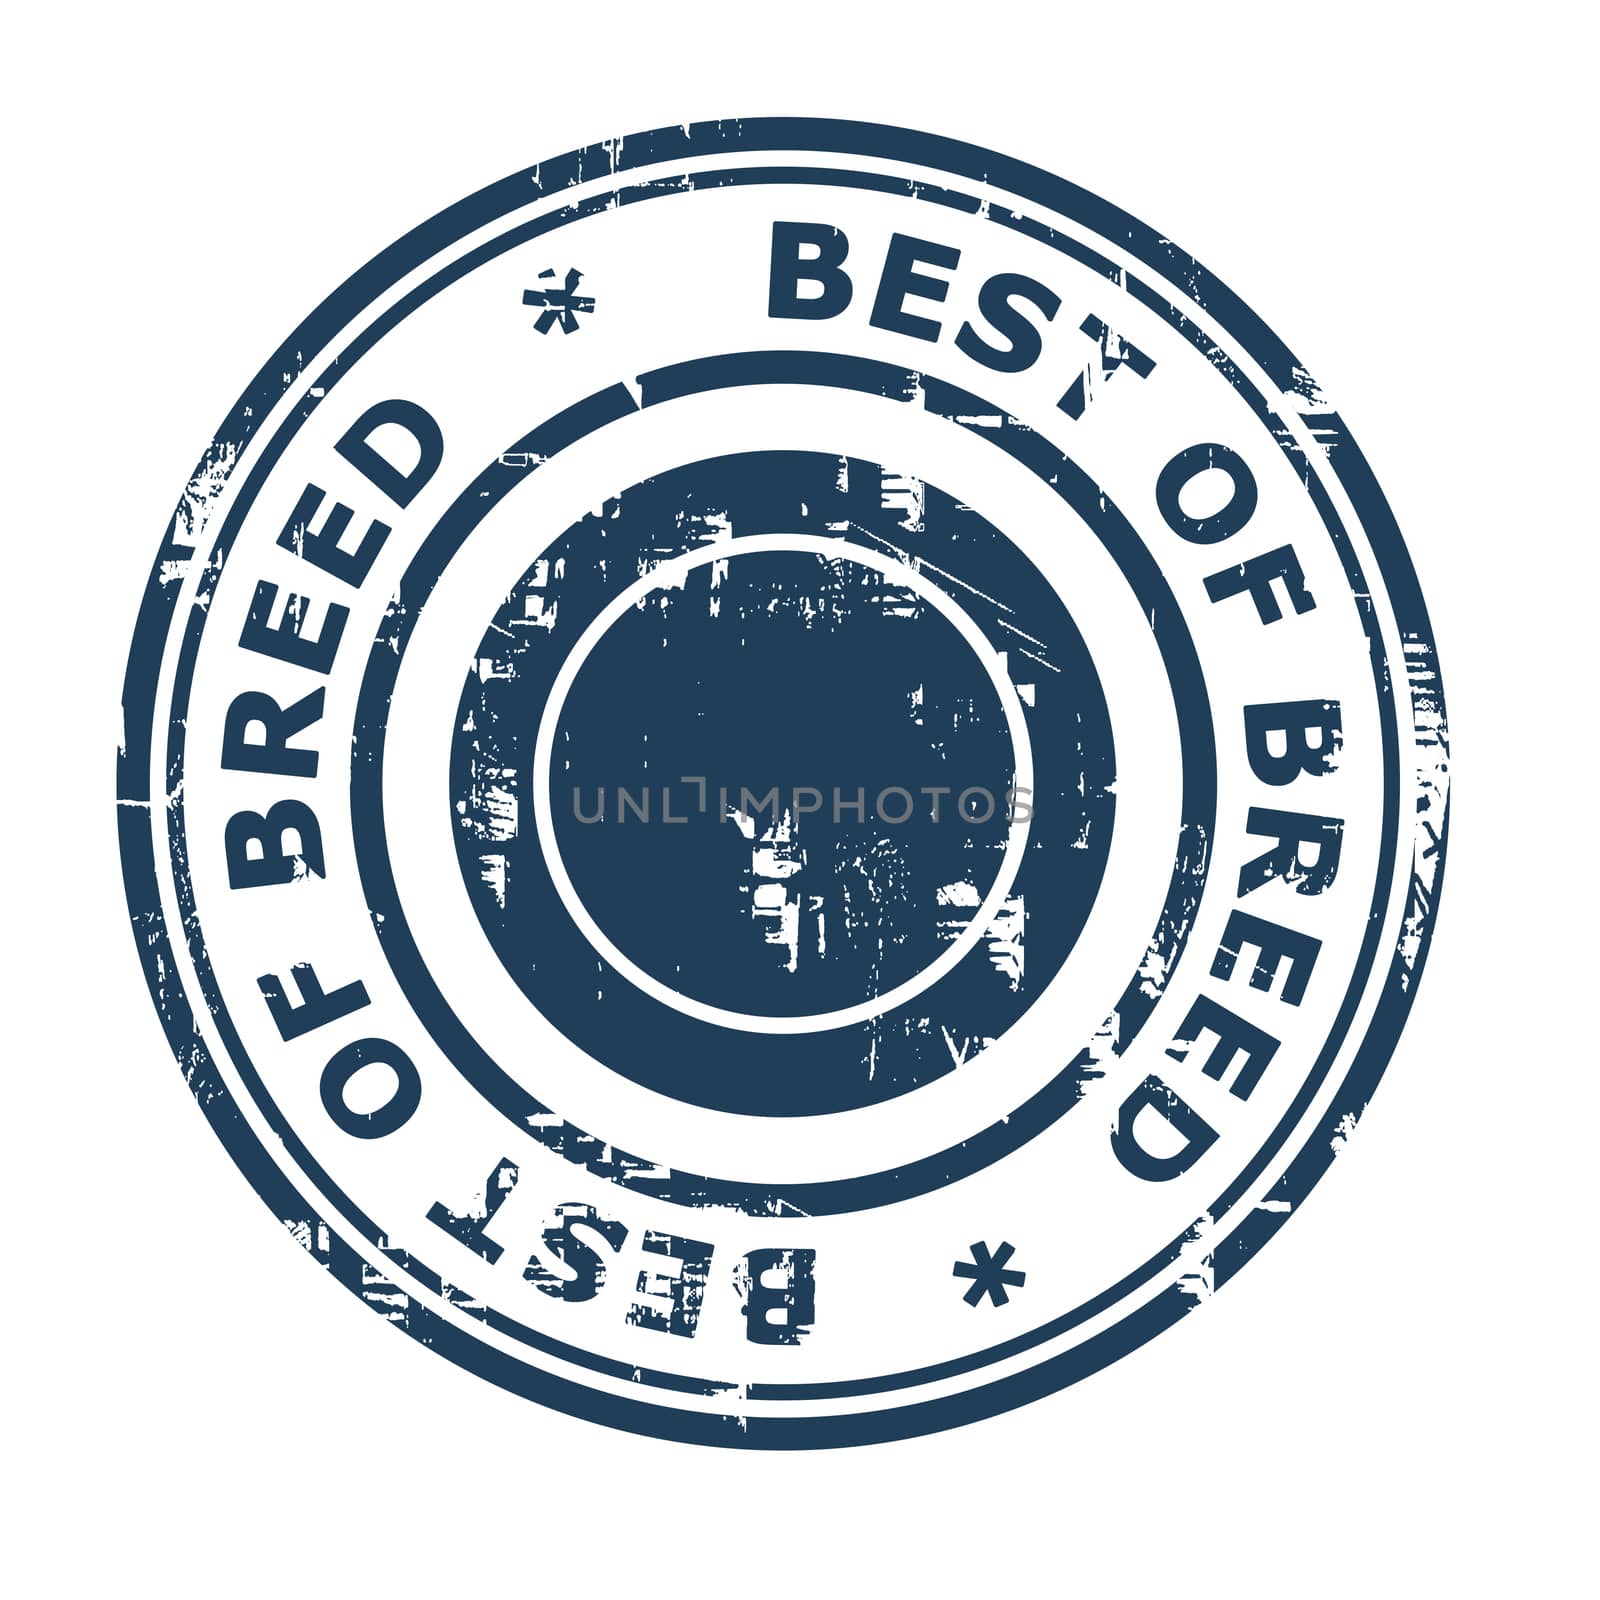 Best of Breed business concept rubber stamp isolated on a white background.